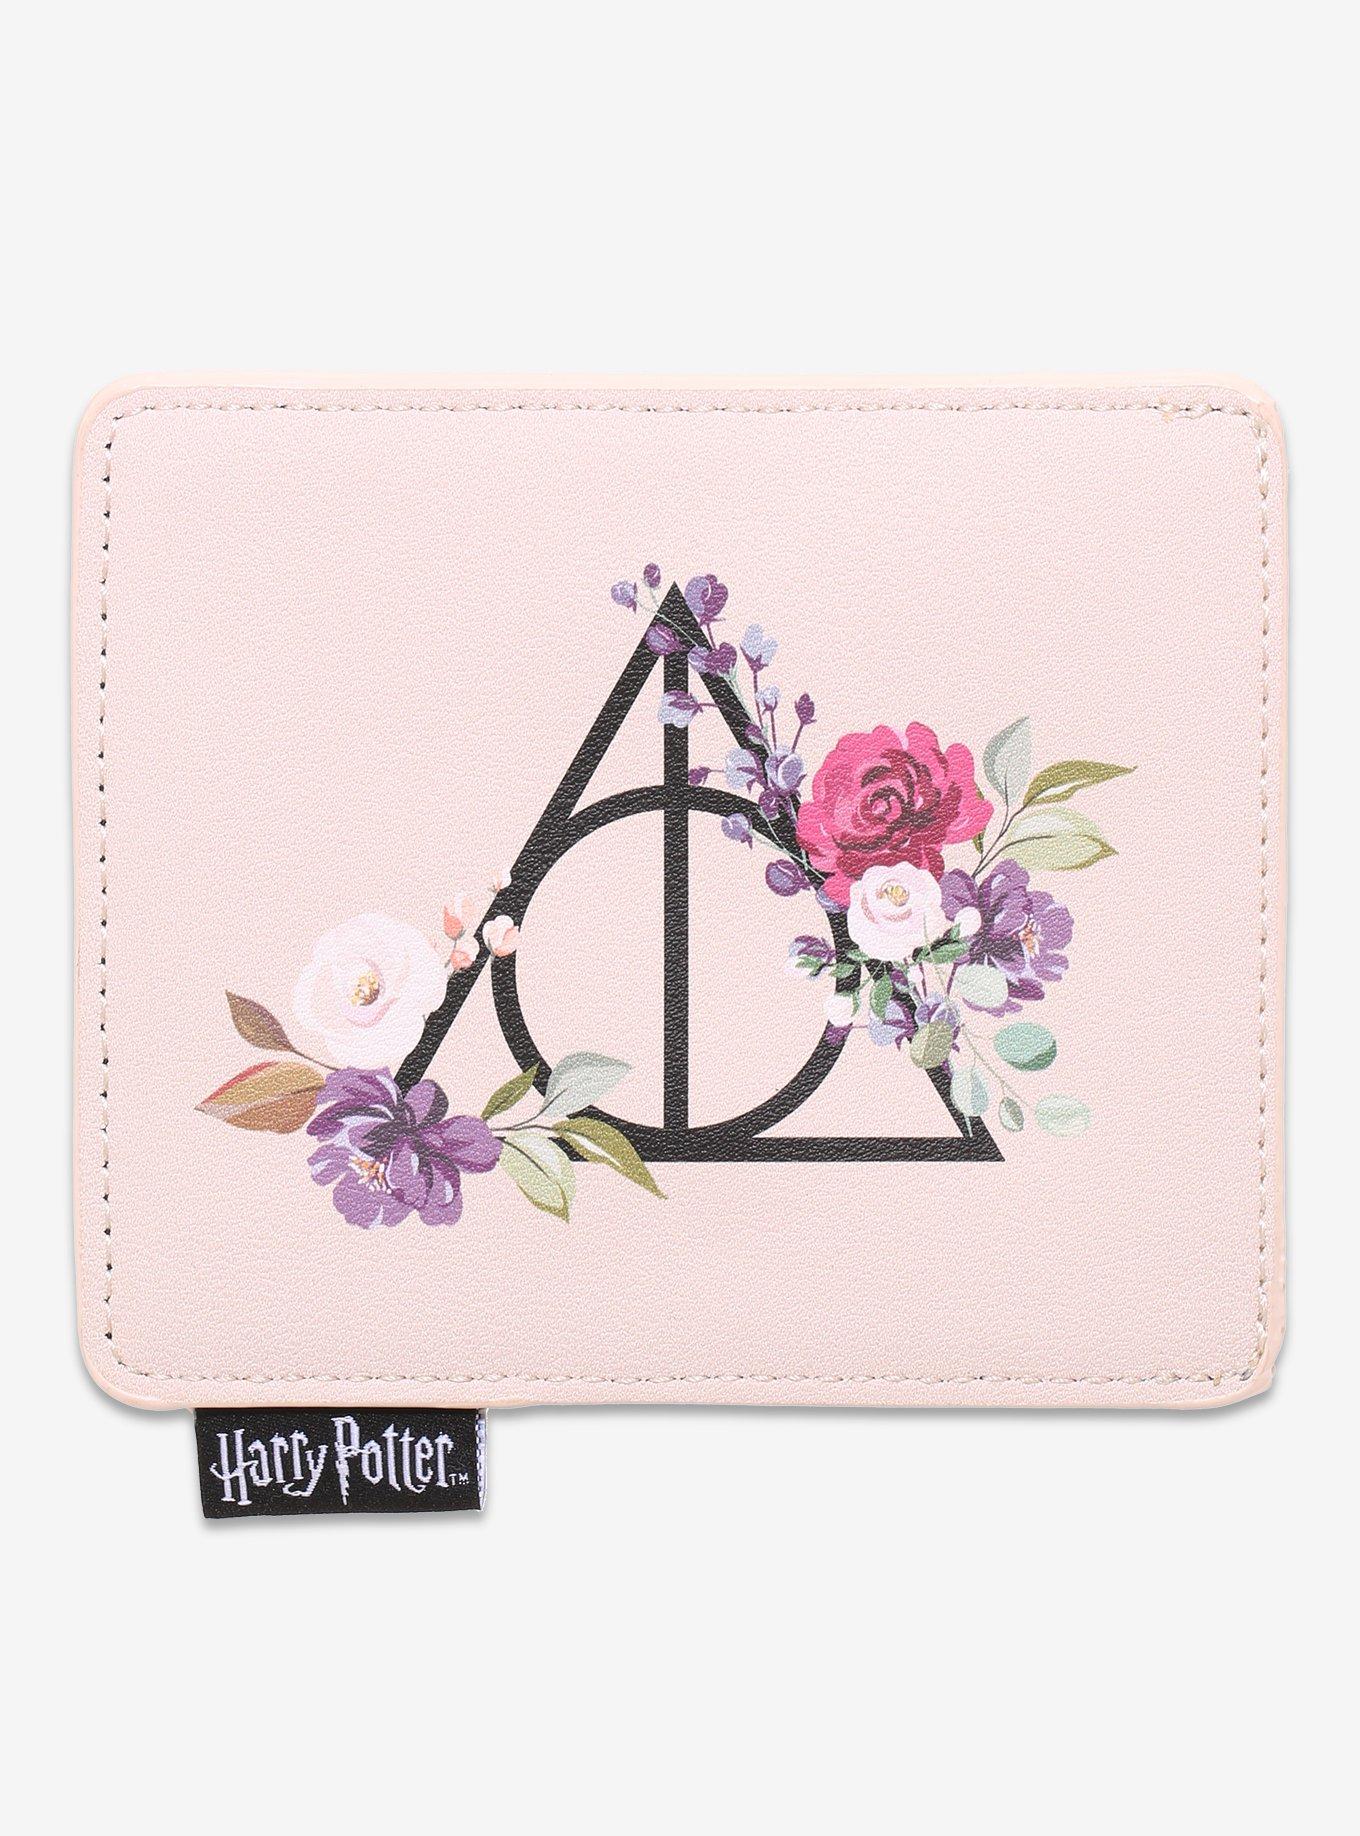 New Loungefly Harry Potter Deathly Hallows Floral Mini Backpack & Tech  Wallet